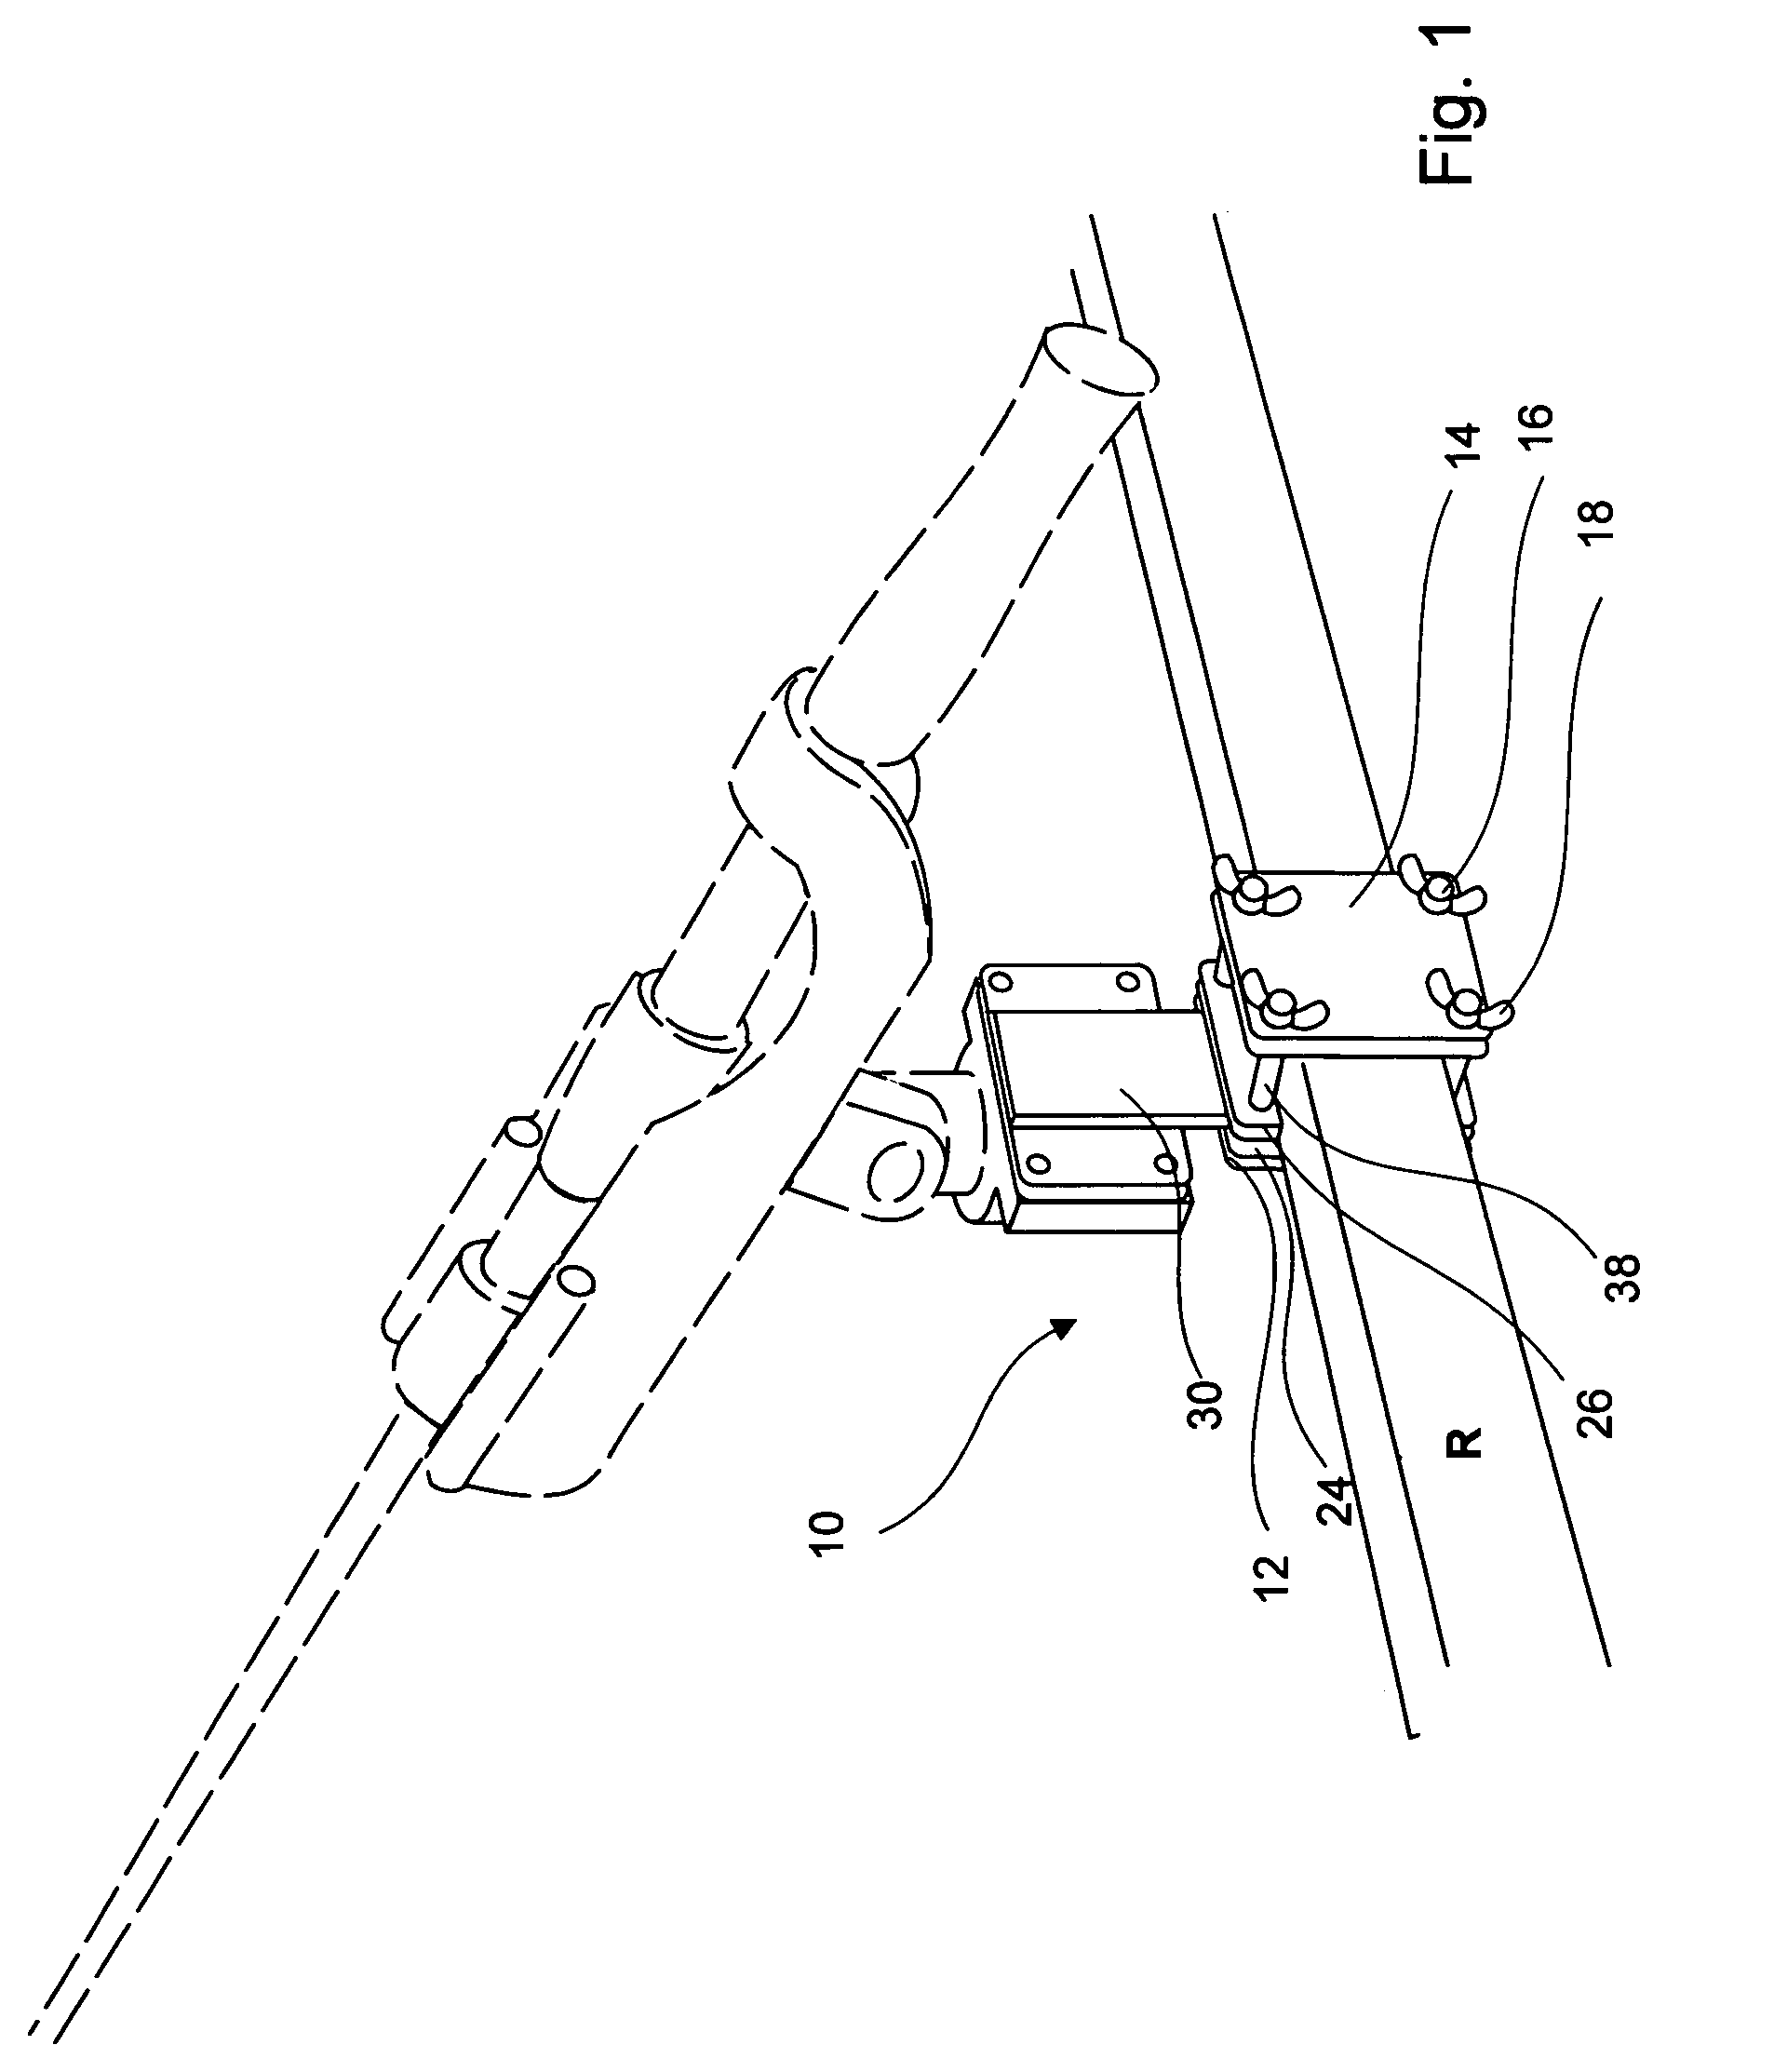 Bracket for holding accessories on a boat